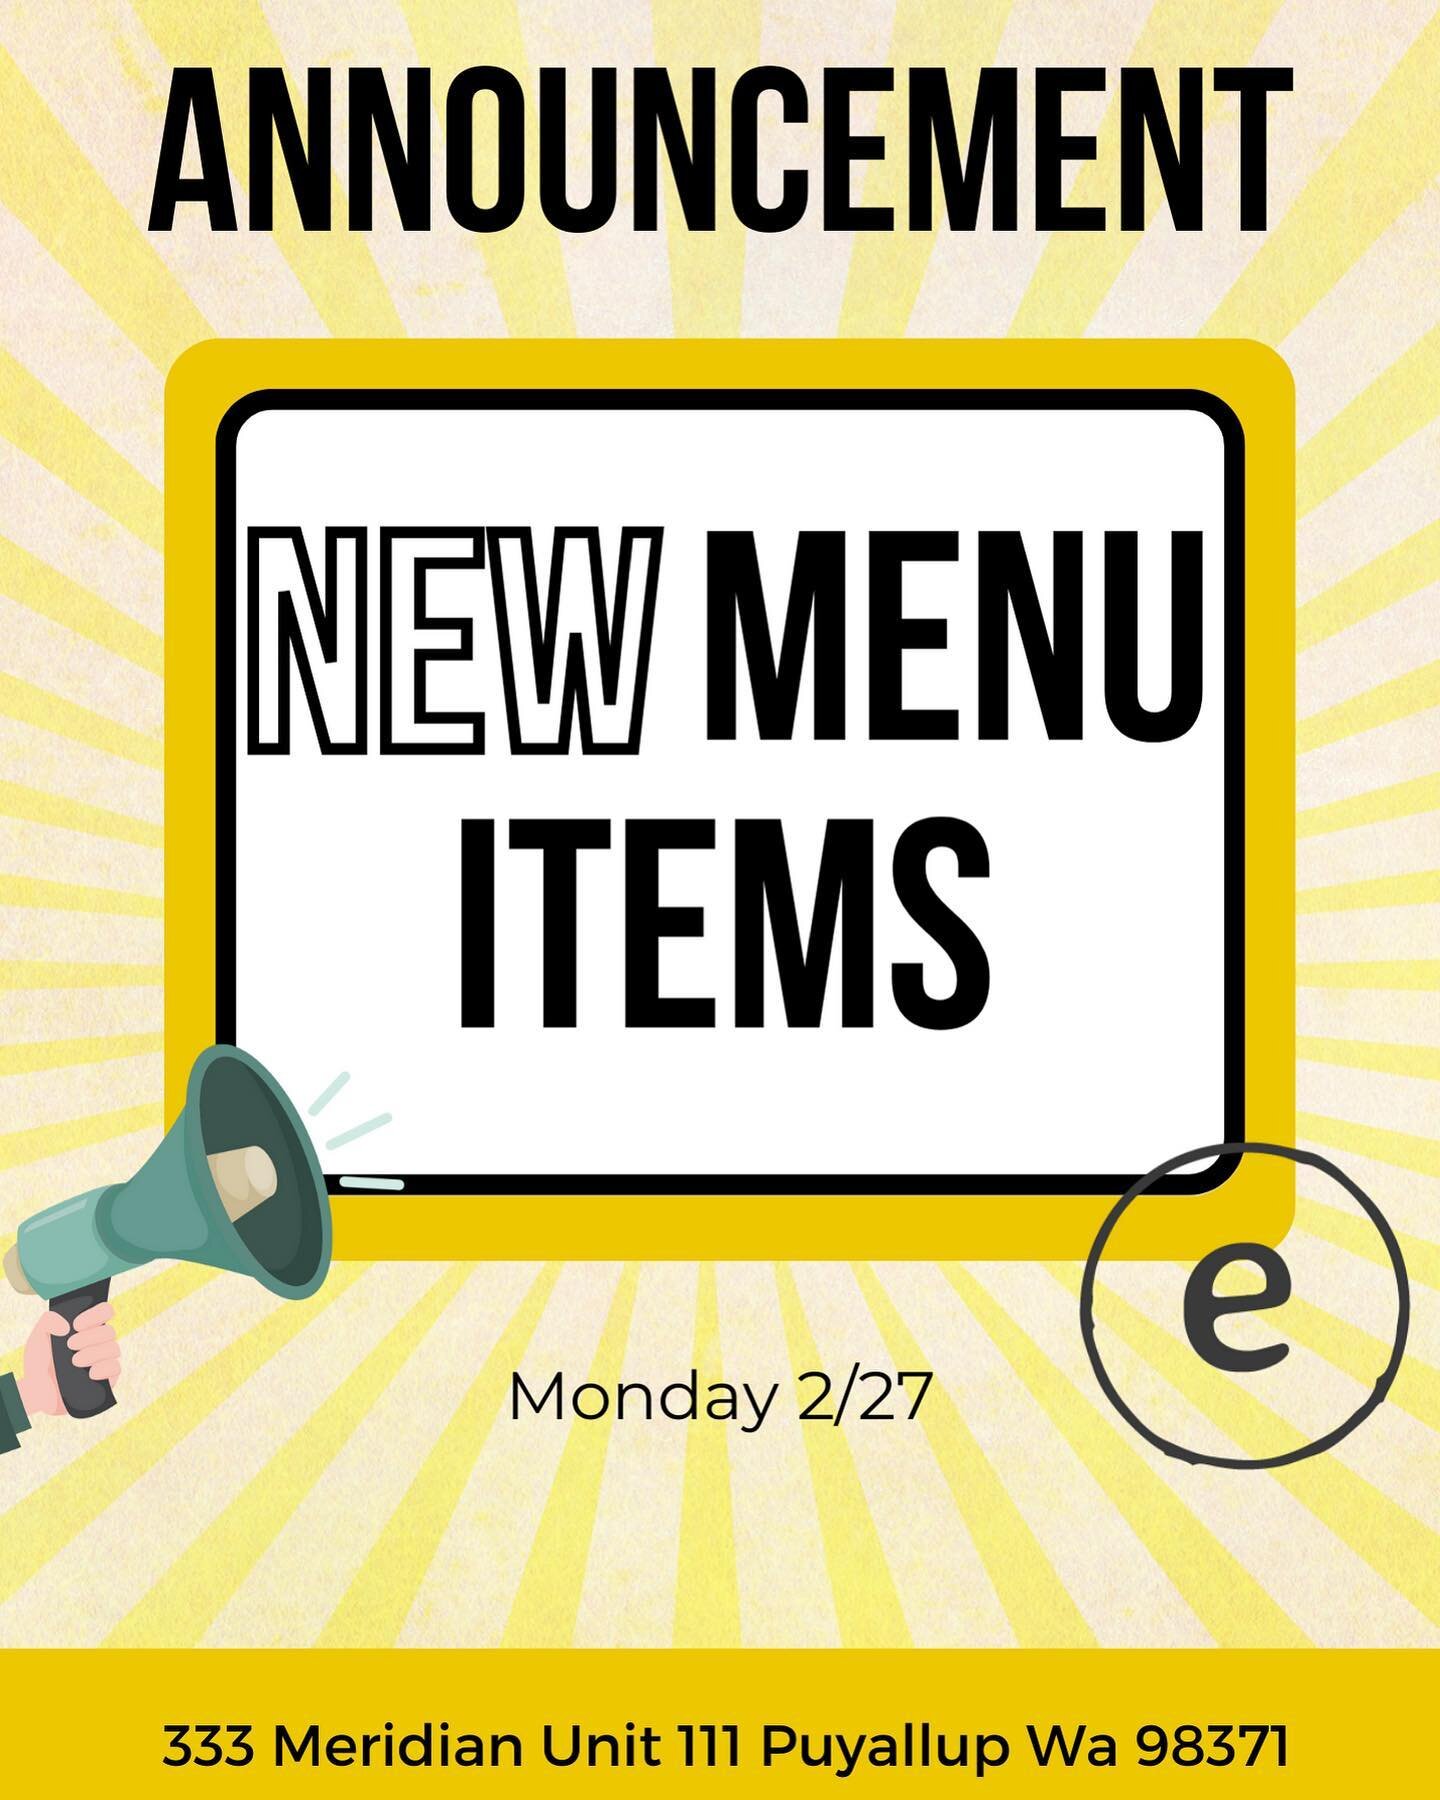 Mark your calendars!! 

🙌🙌🙌🙌🙌

We have new menu items launching on Monday 2/27!! 

Swing in and pick up one of our NEW and delicious menu items. 

Oh&hellip; you want to know what they are? 🤫
We are sharing that very soon. 

Stay tuned! 
It&rsq